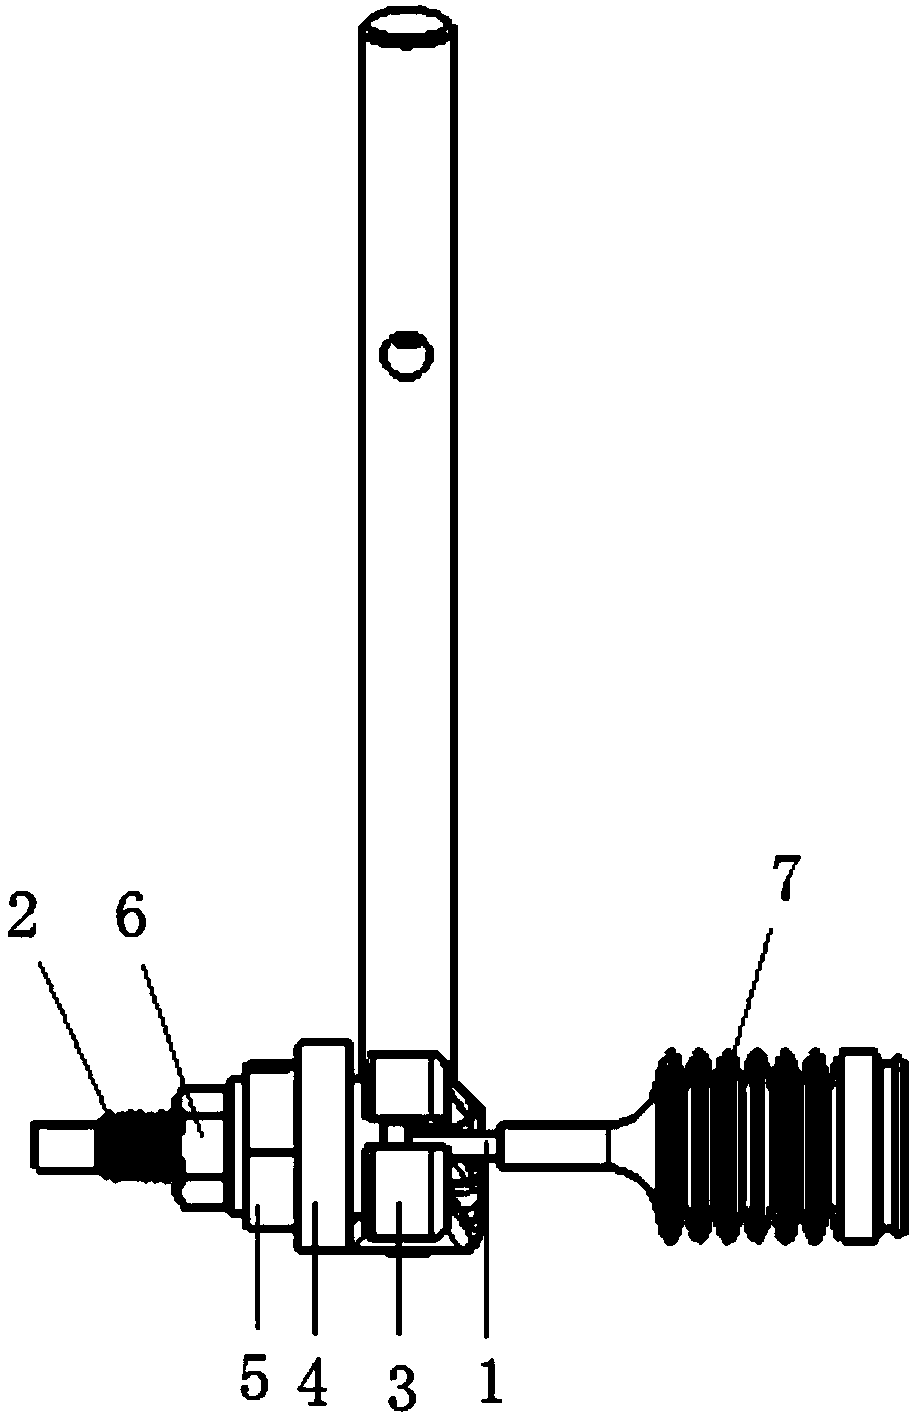 A cable structure for clutch control of a mechanical automatic transmission